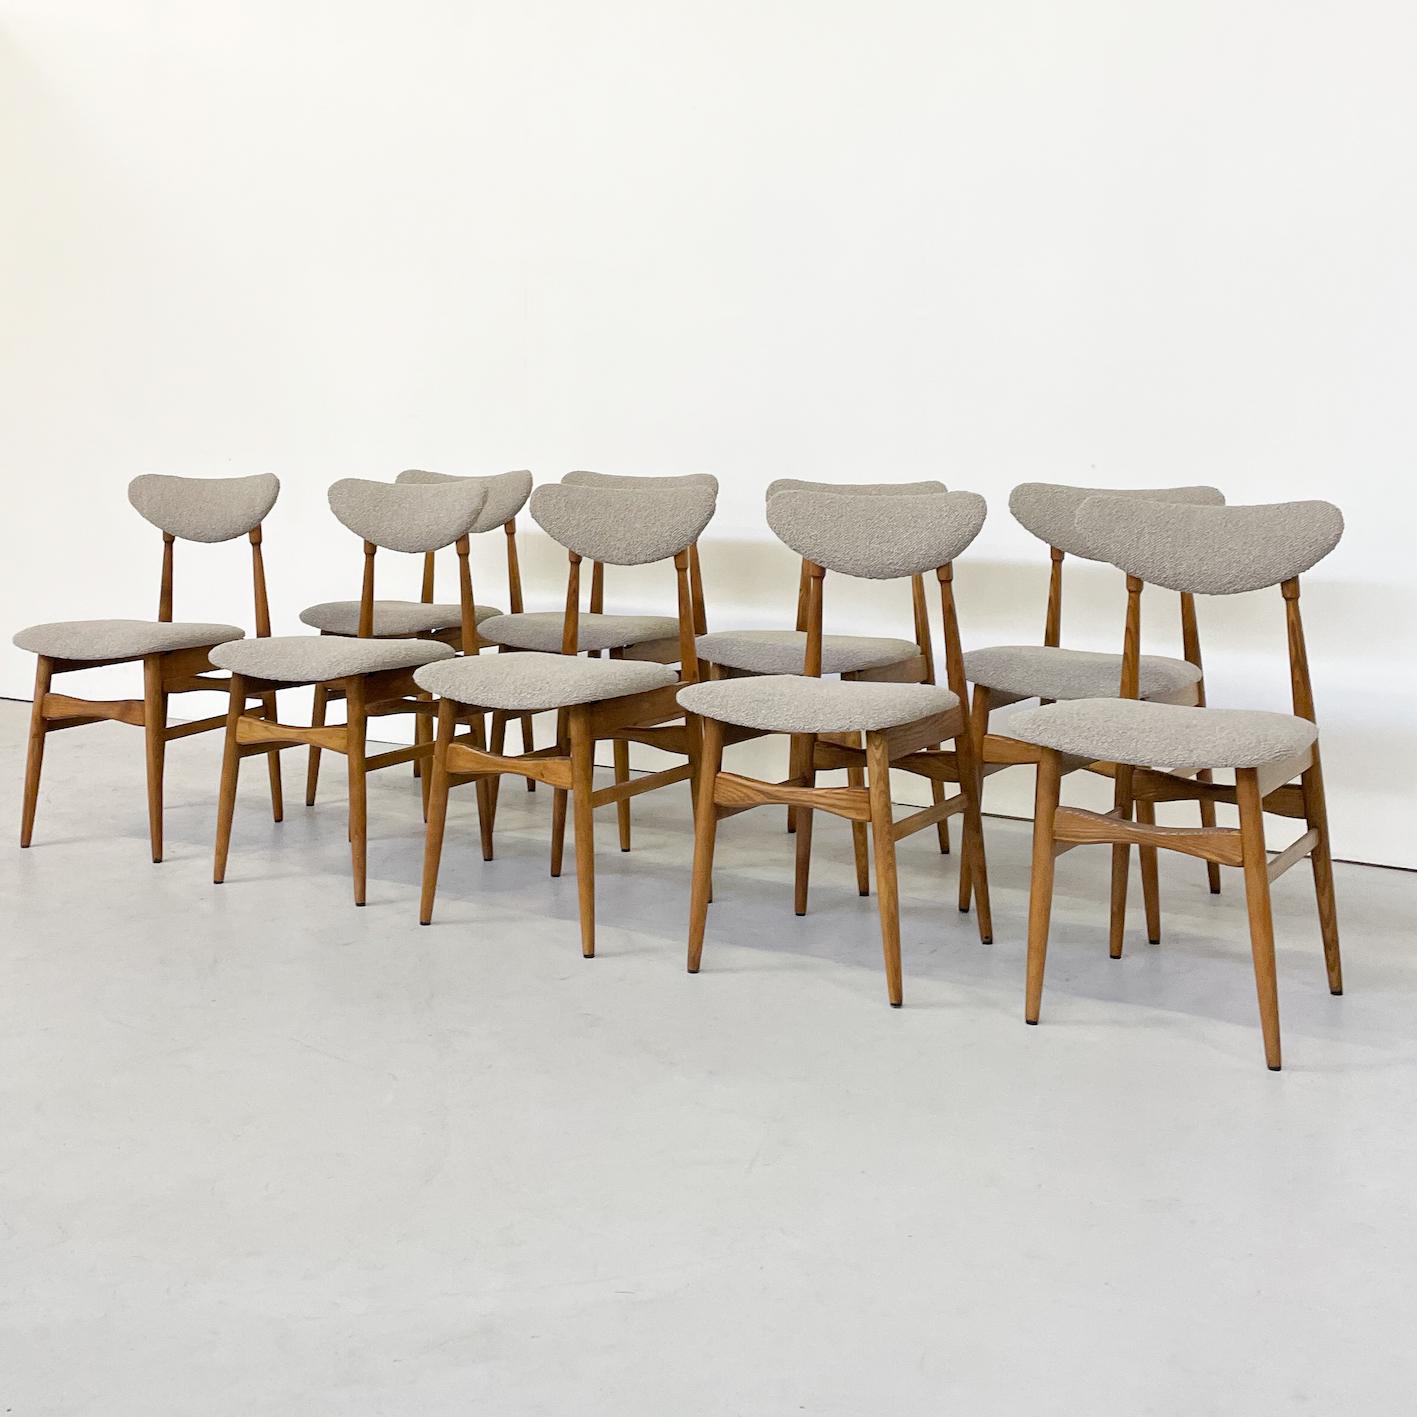 Milieu du XXe siècle The Modernity Set of 12 Chairs, Italie, 1960s - New Upholstery en vente